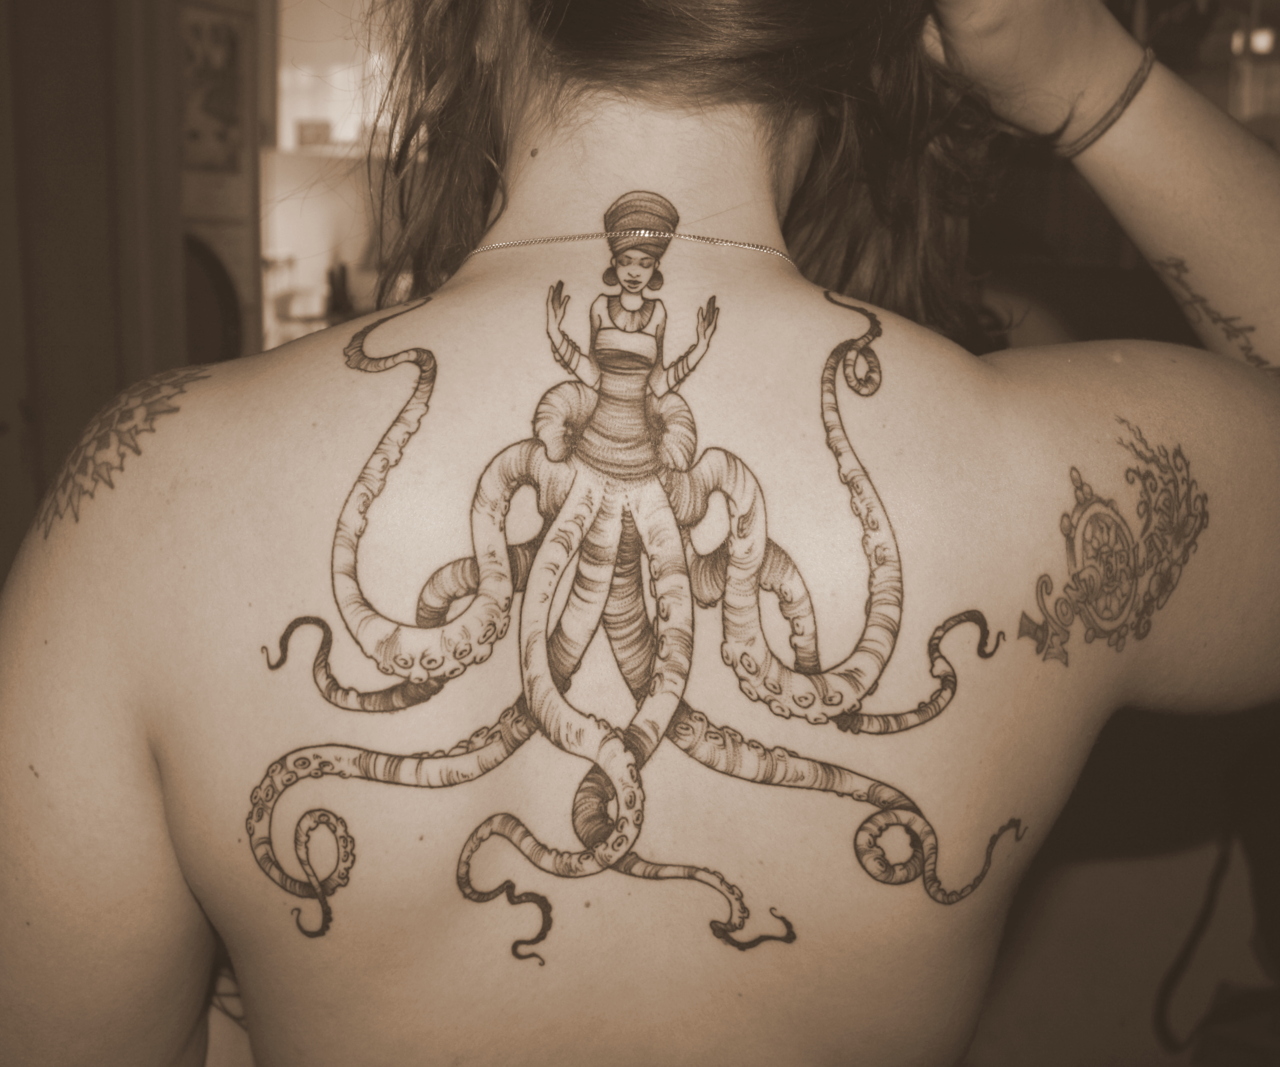 Octopus Tattoos Designs, Ideas and Meaning | Tattoos For You